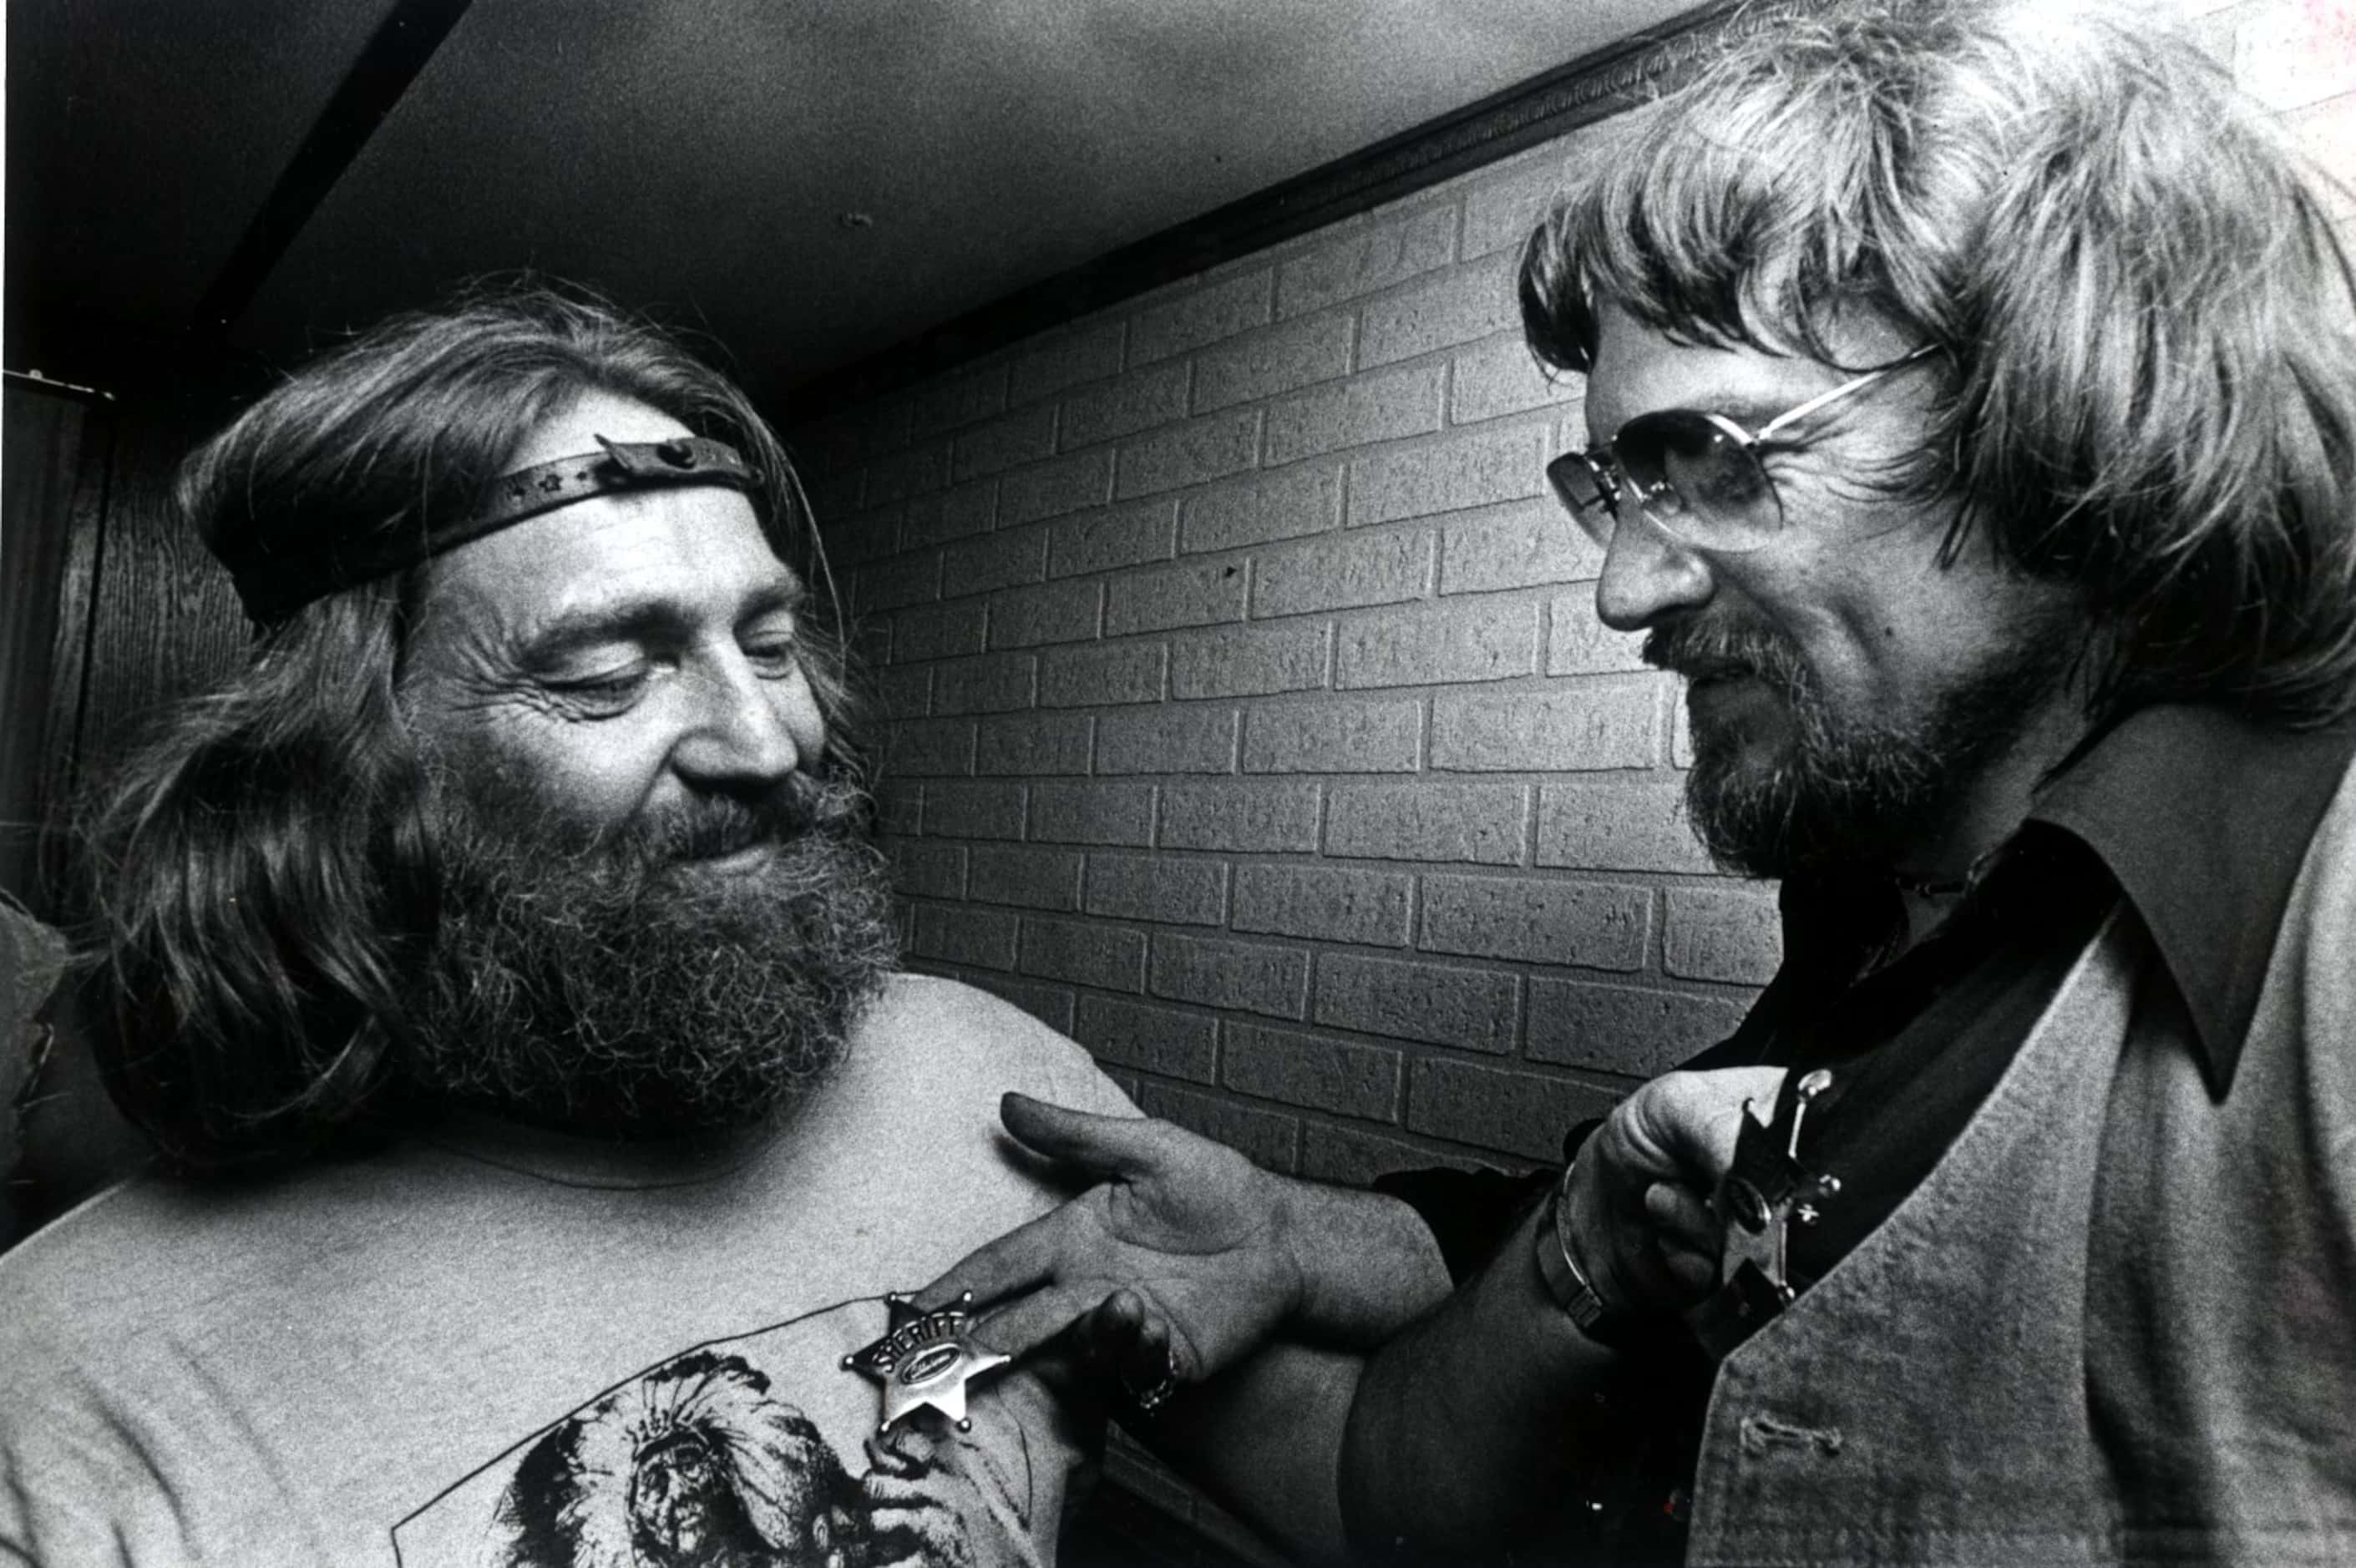 Better known as musical outlaws, Willie Nelson and Waylon Jennings check out each others'...